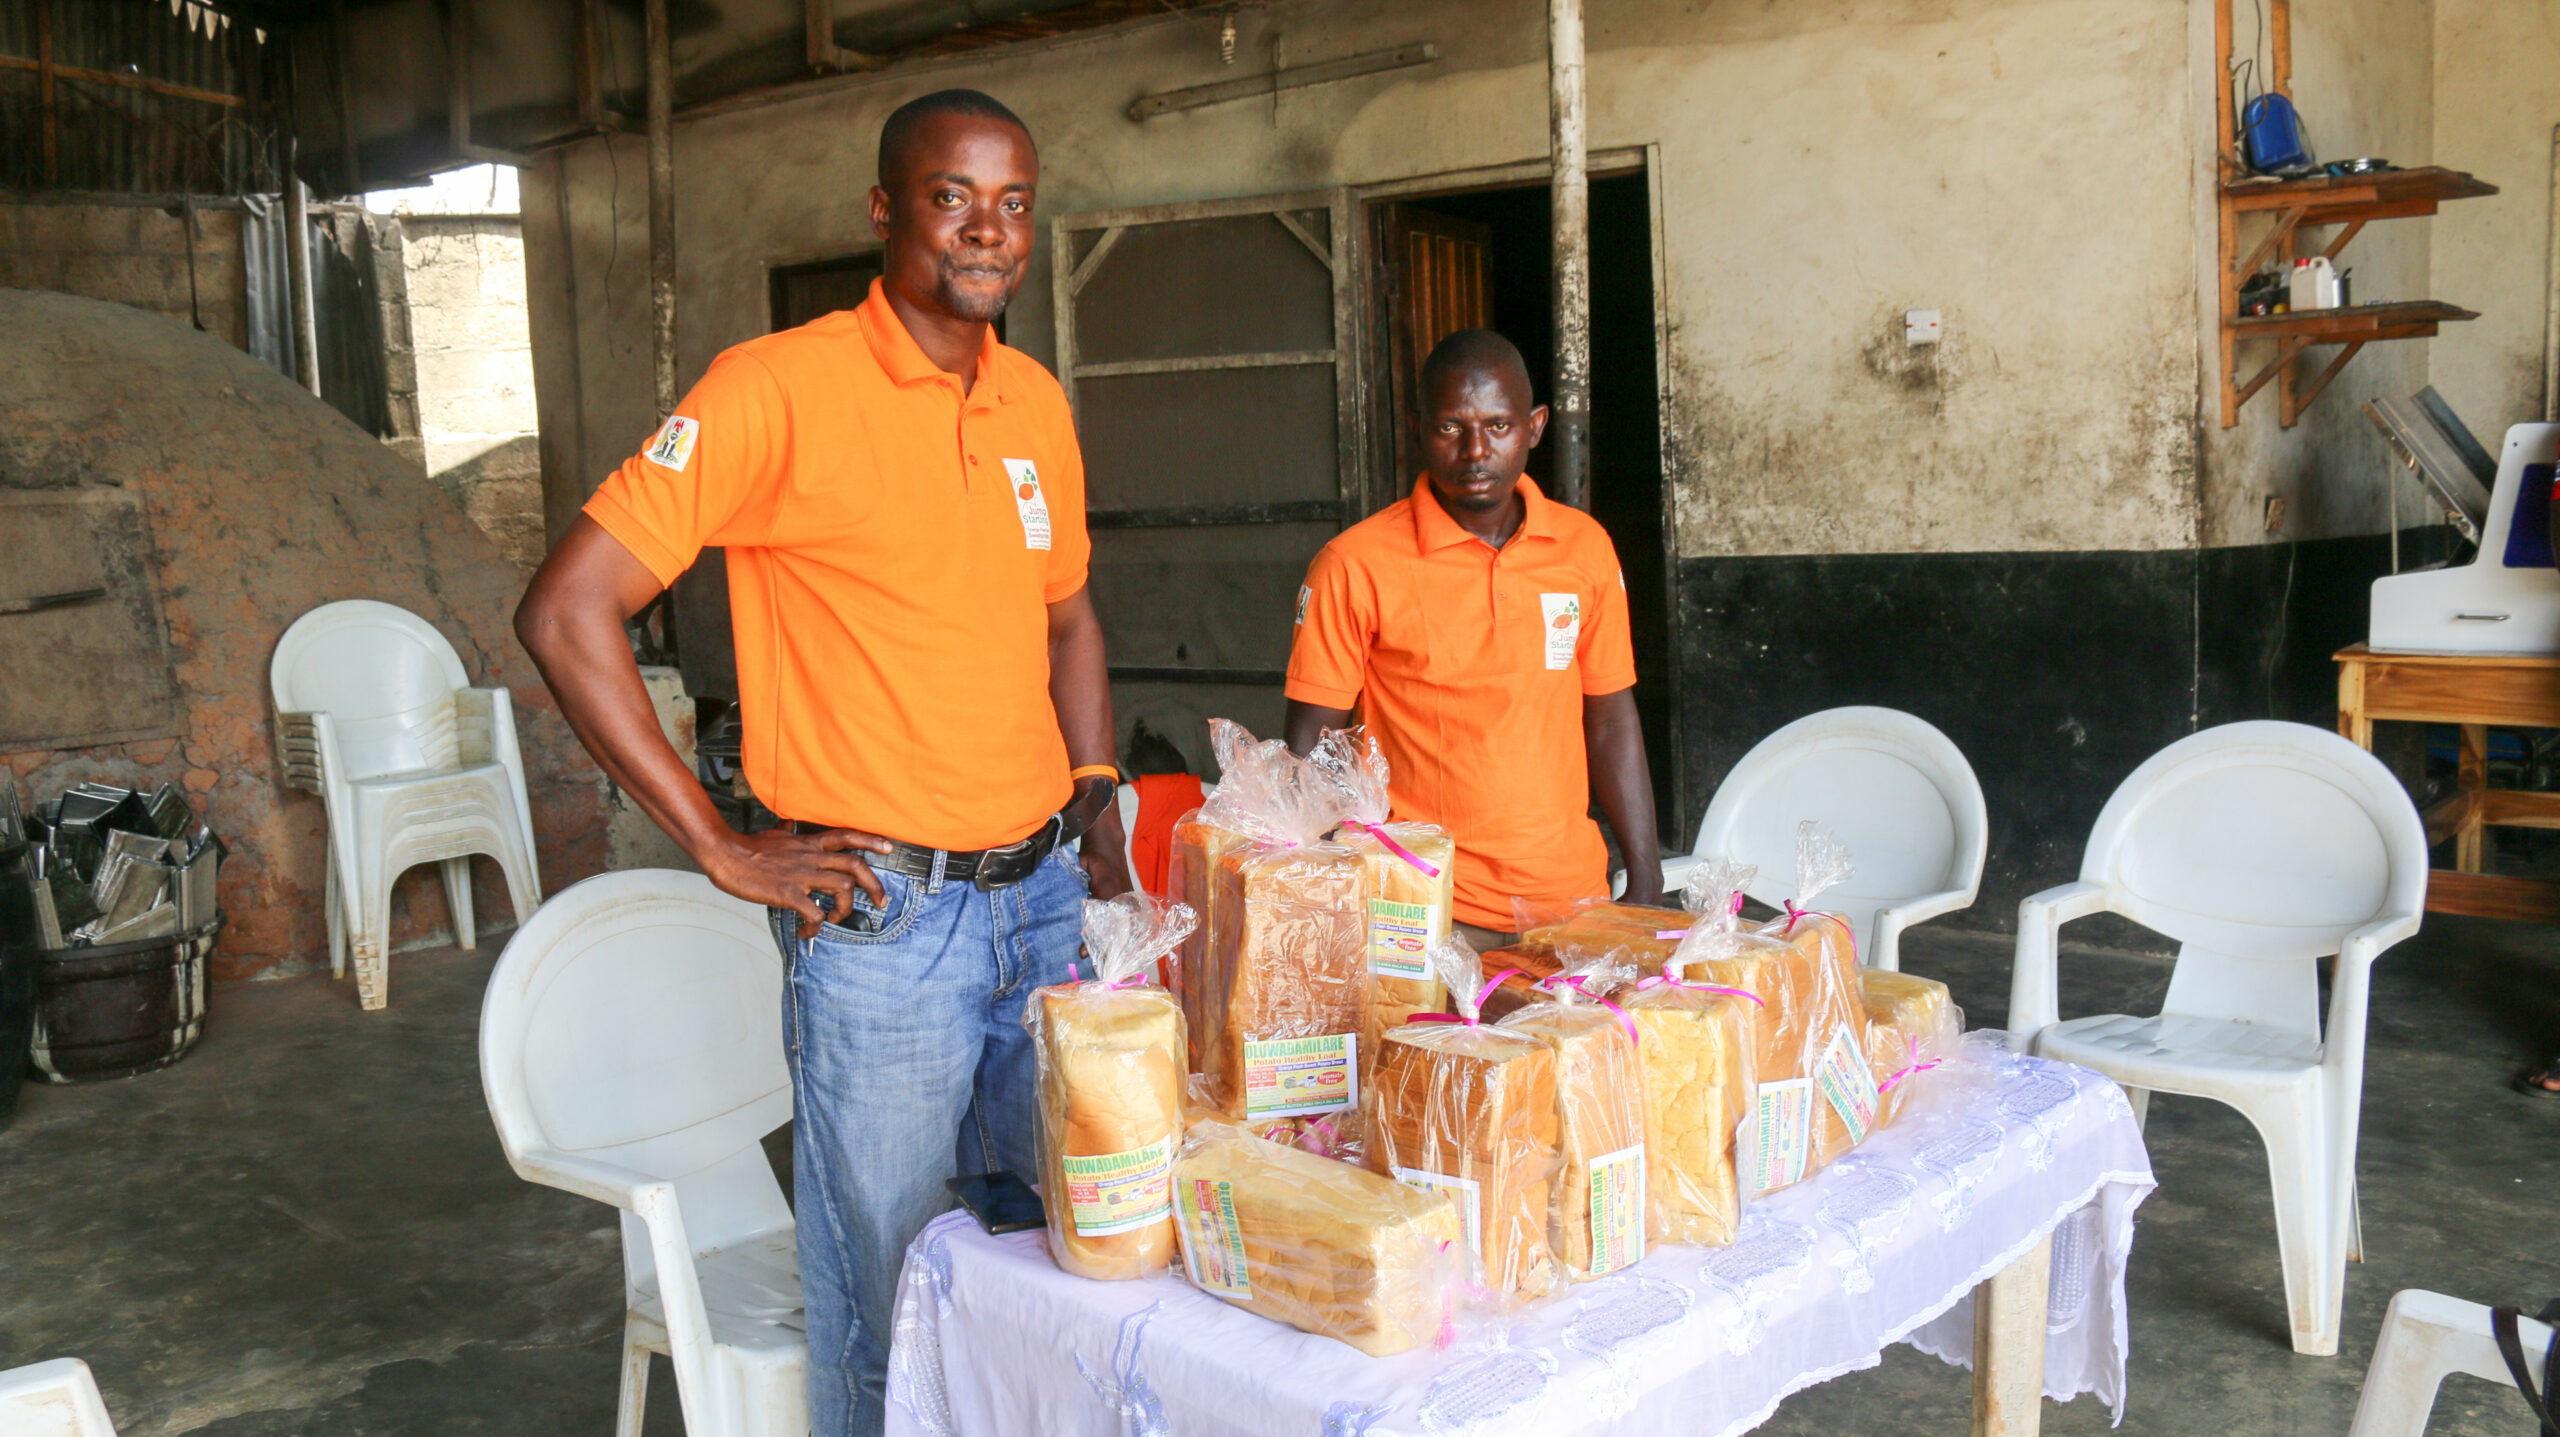 Fatai Ganiyu (left) displaying OFSP bread loaves made BY his bakery (PHOTO CREDIT: CIP)